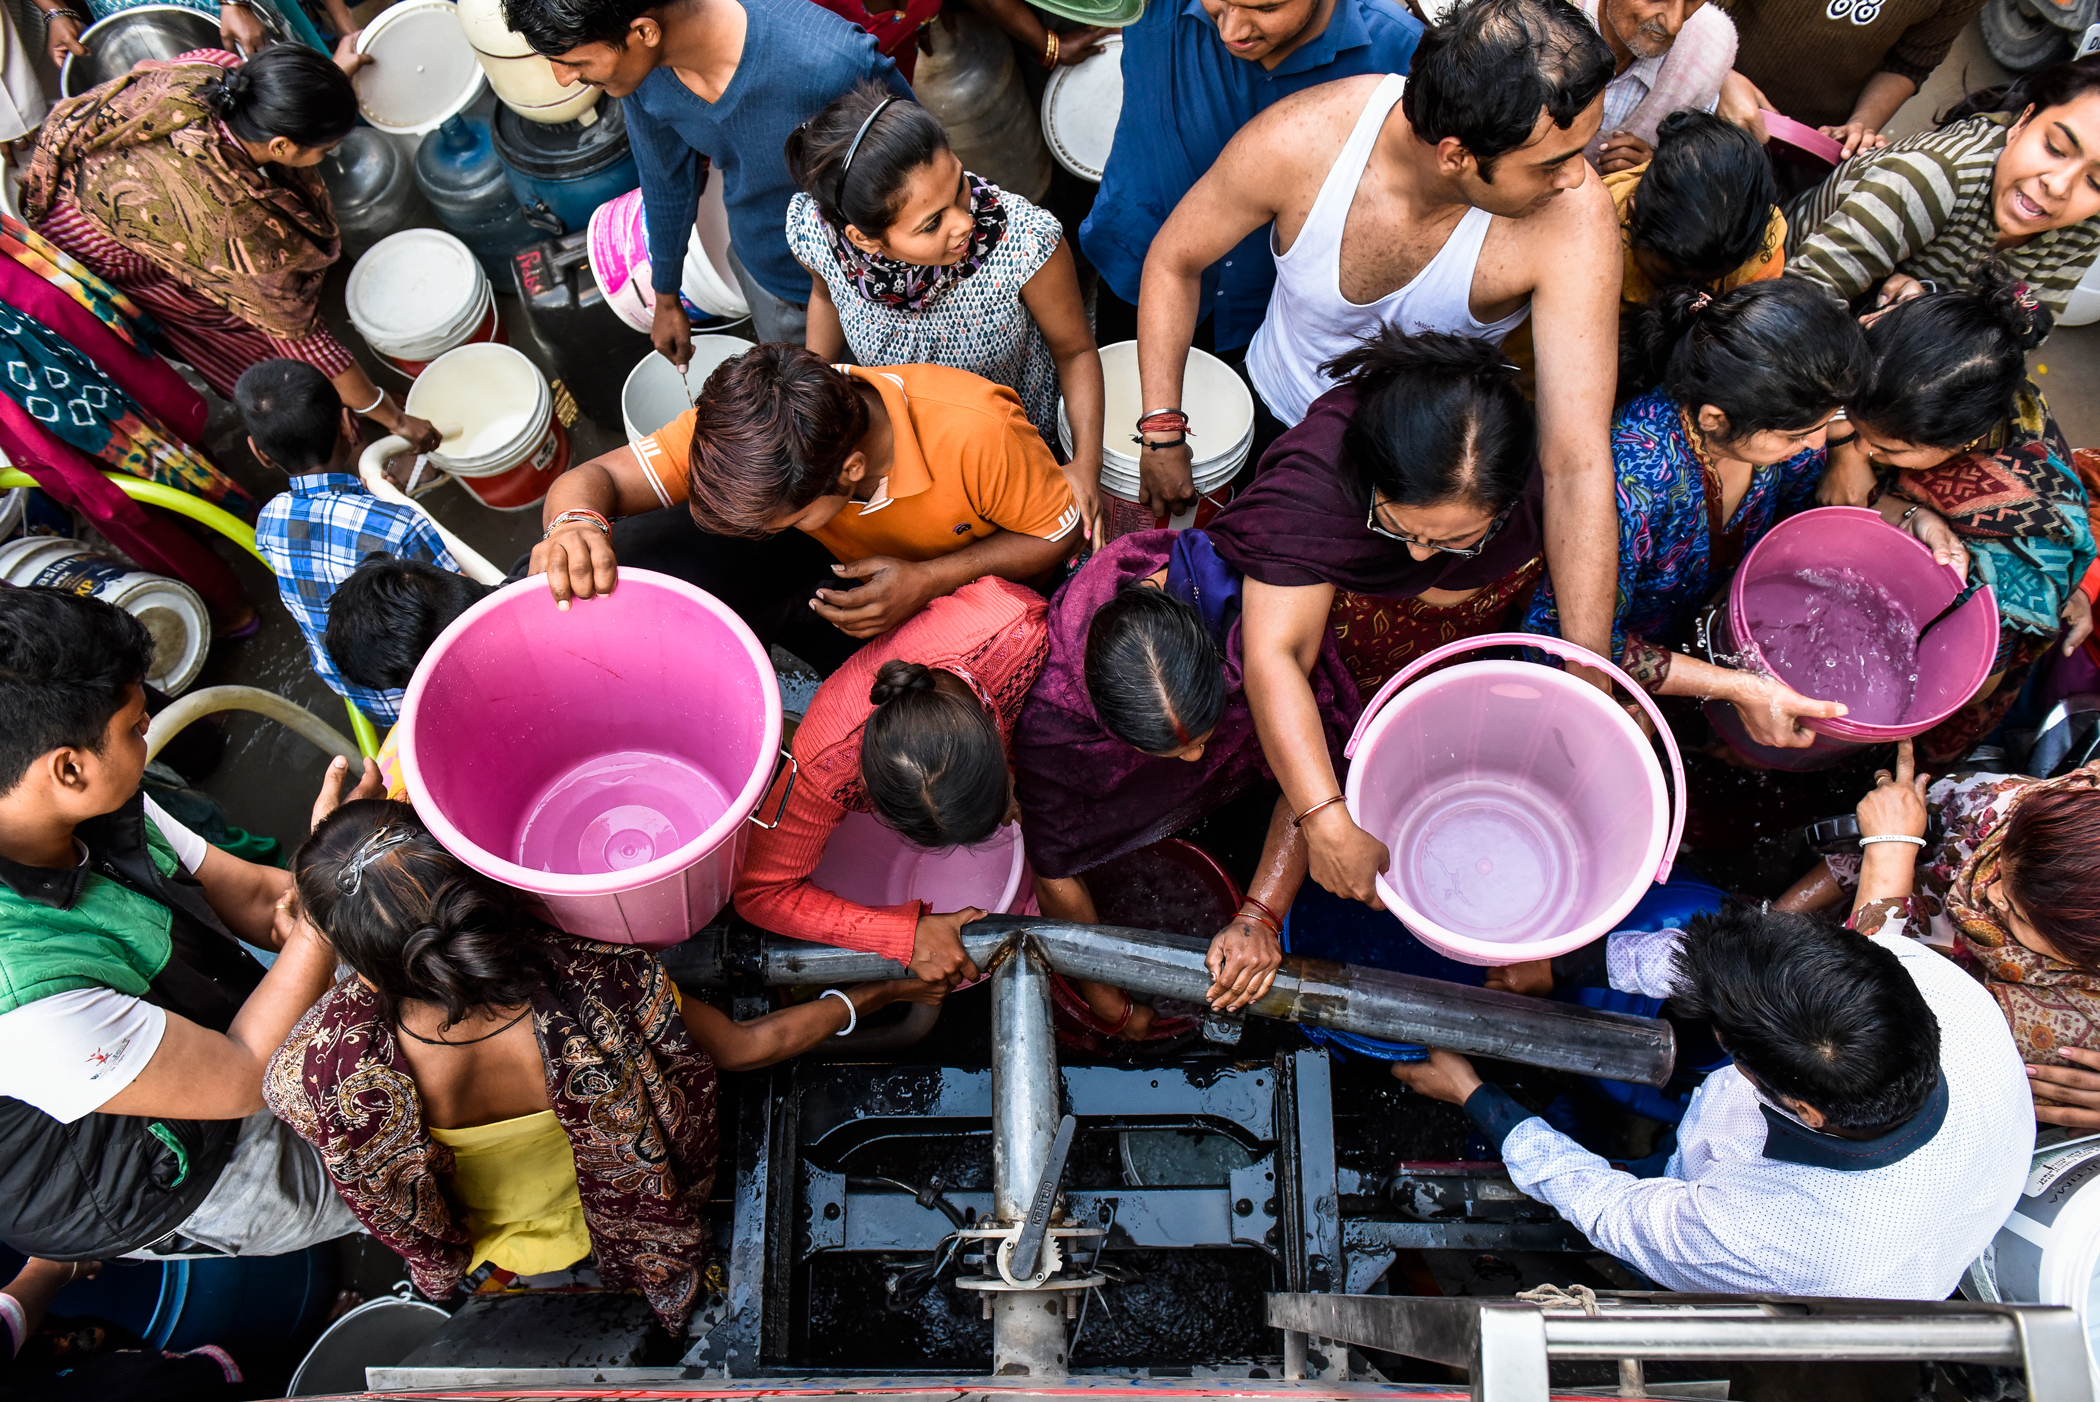 Image of people in India crowding to fill buckets with clean drinking water.